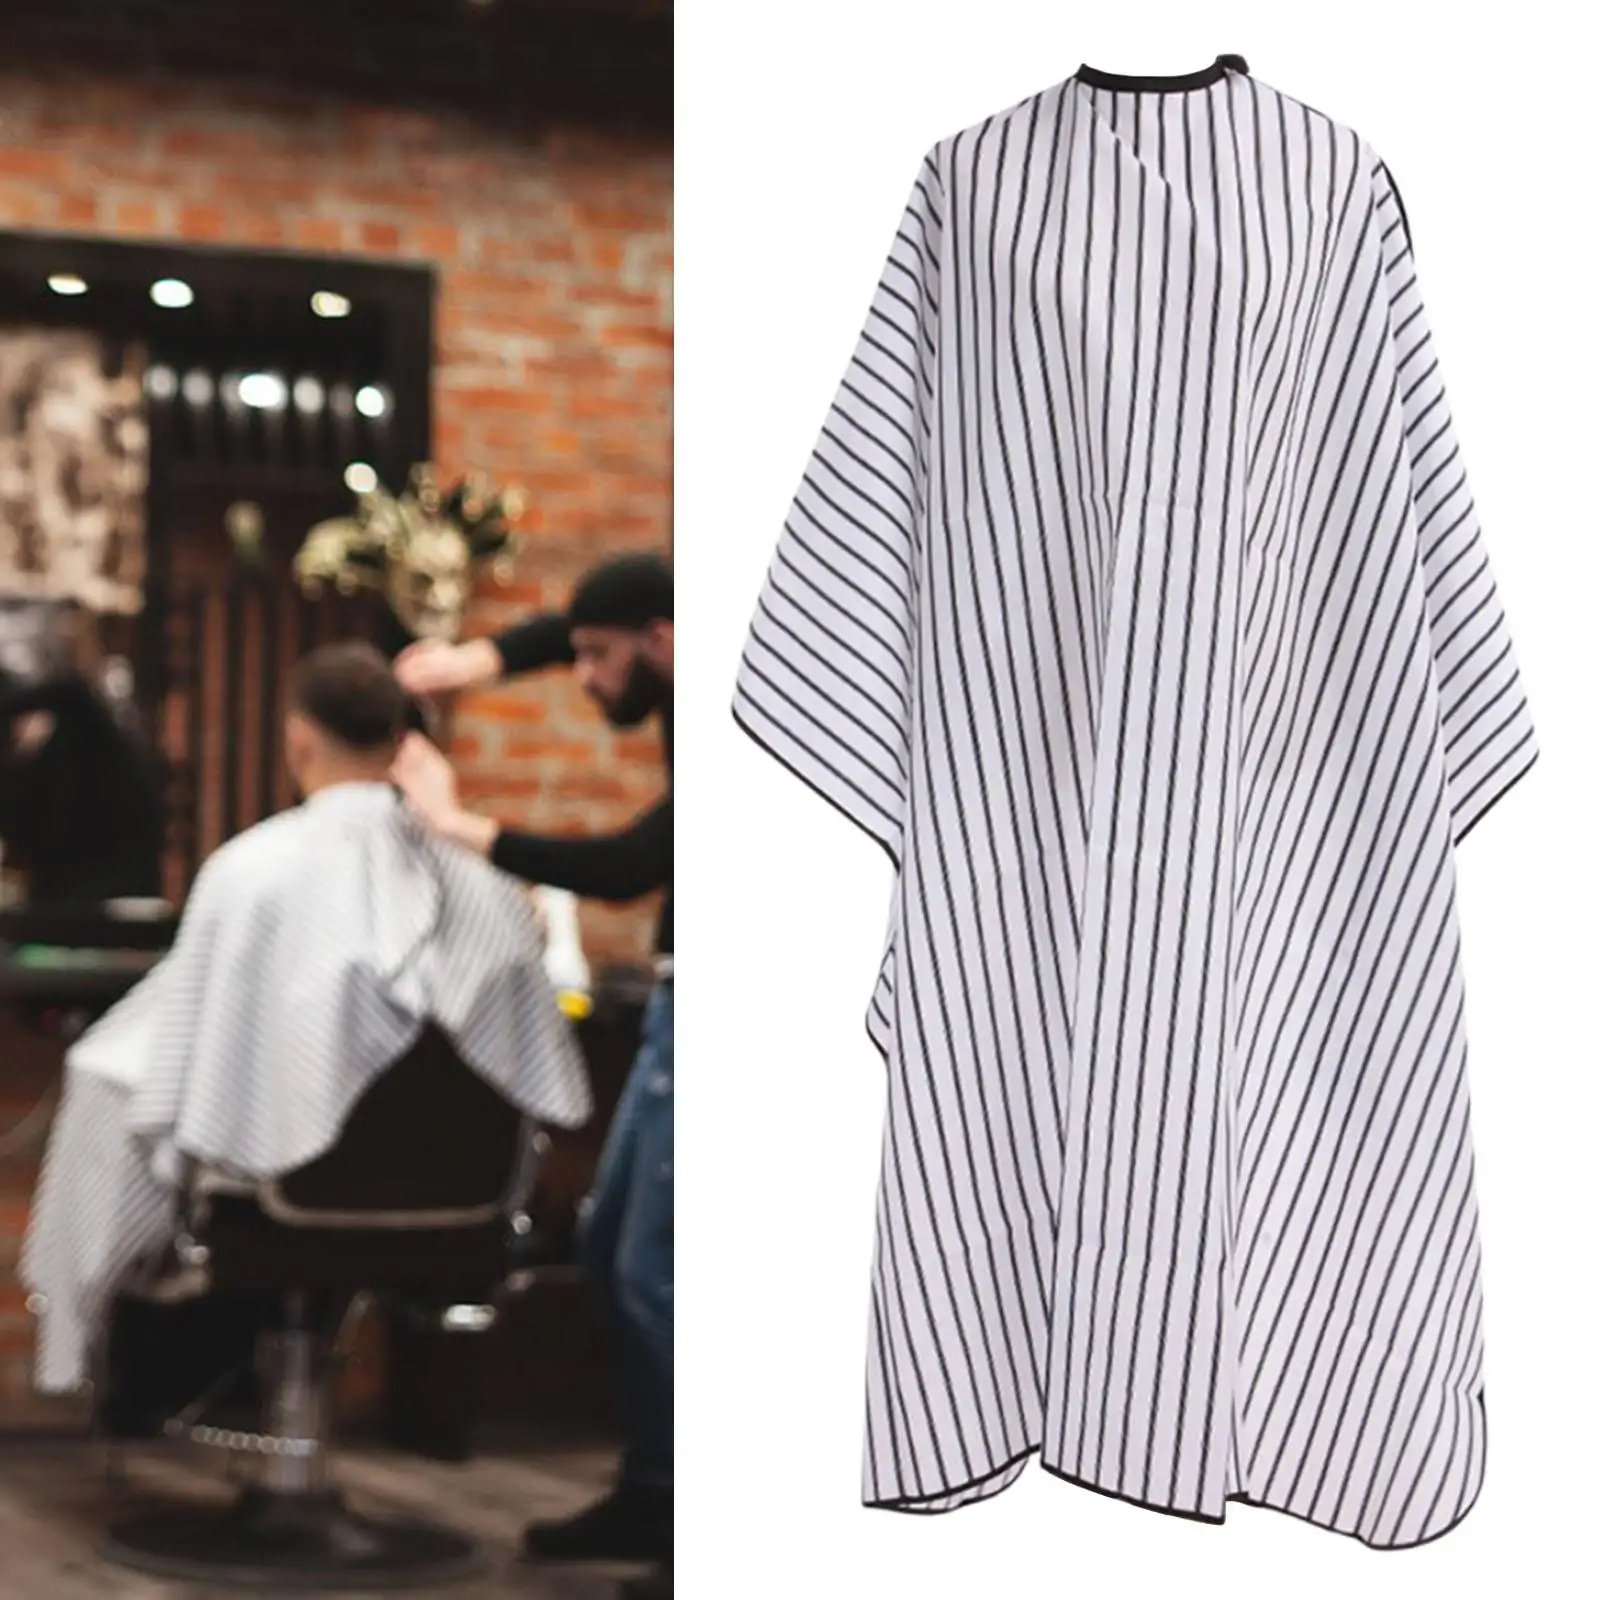 Stripe Pattern Hair Cutting Cape, Great Fabric Accessories for